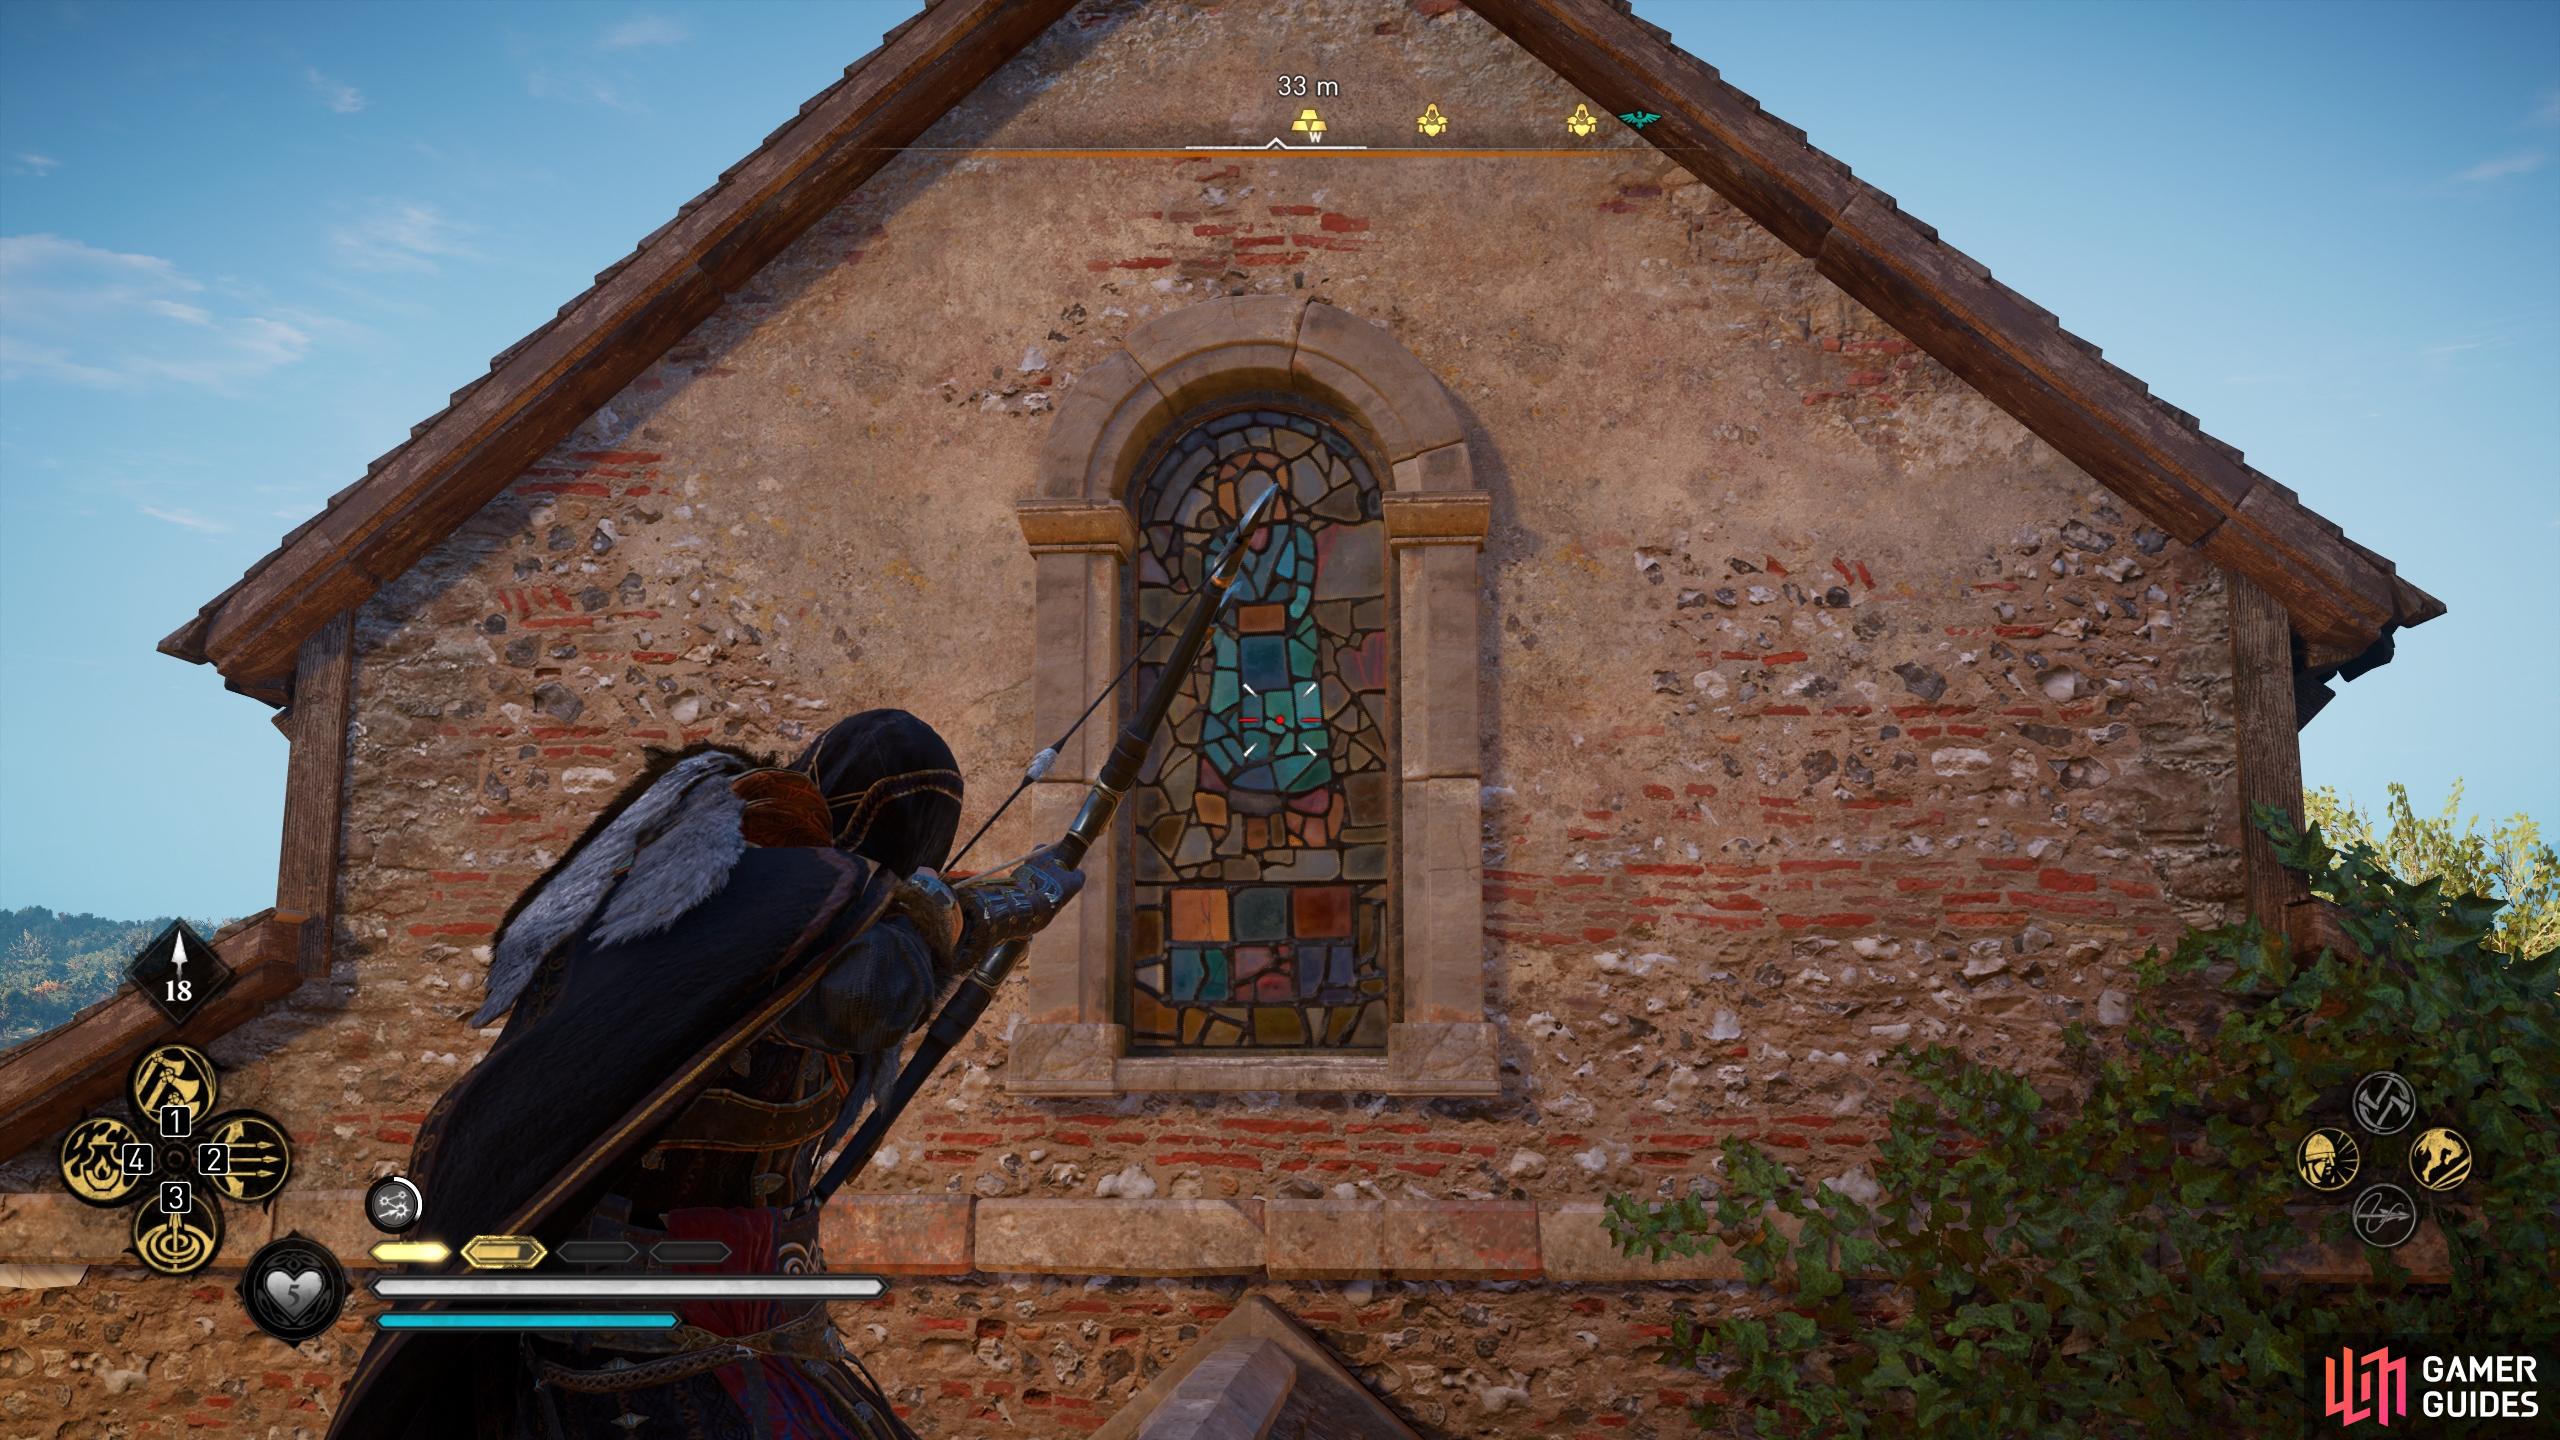 Shoot the window on the eastern side of the seminary to enter it.